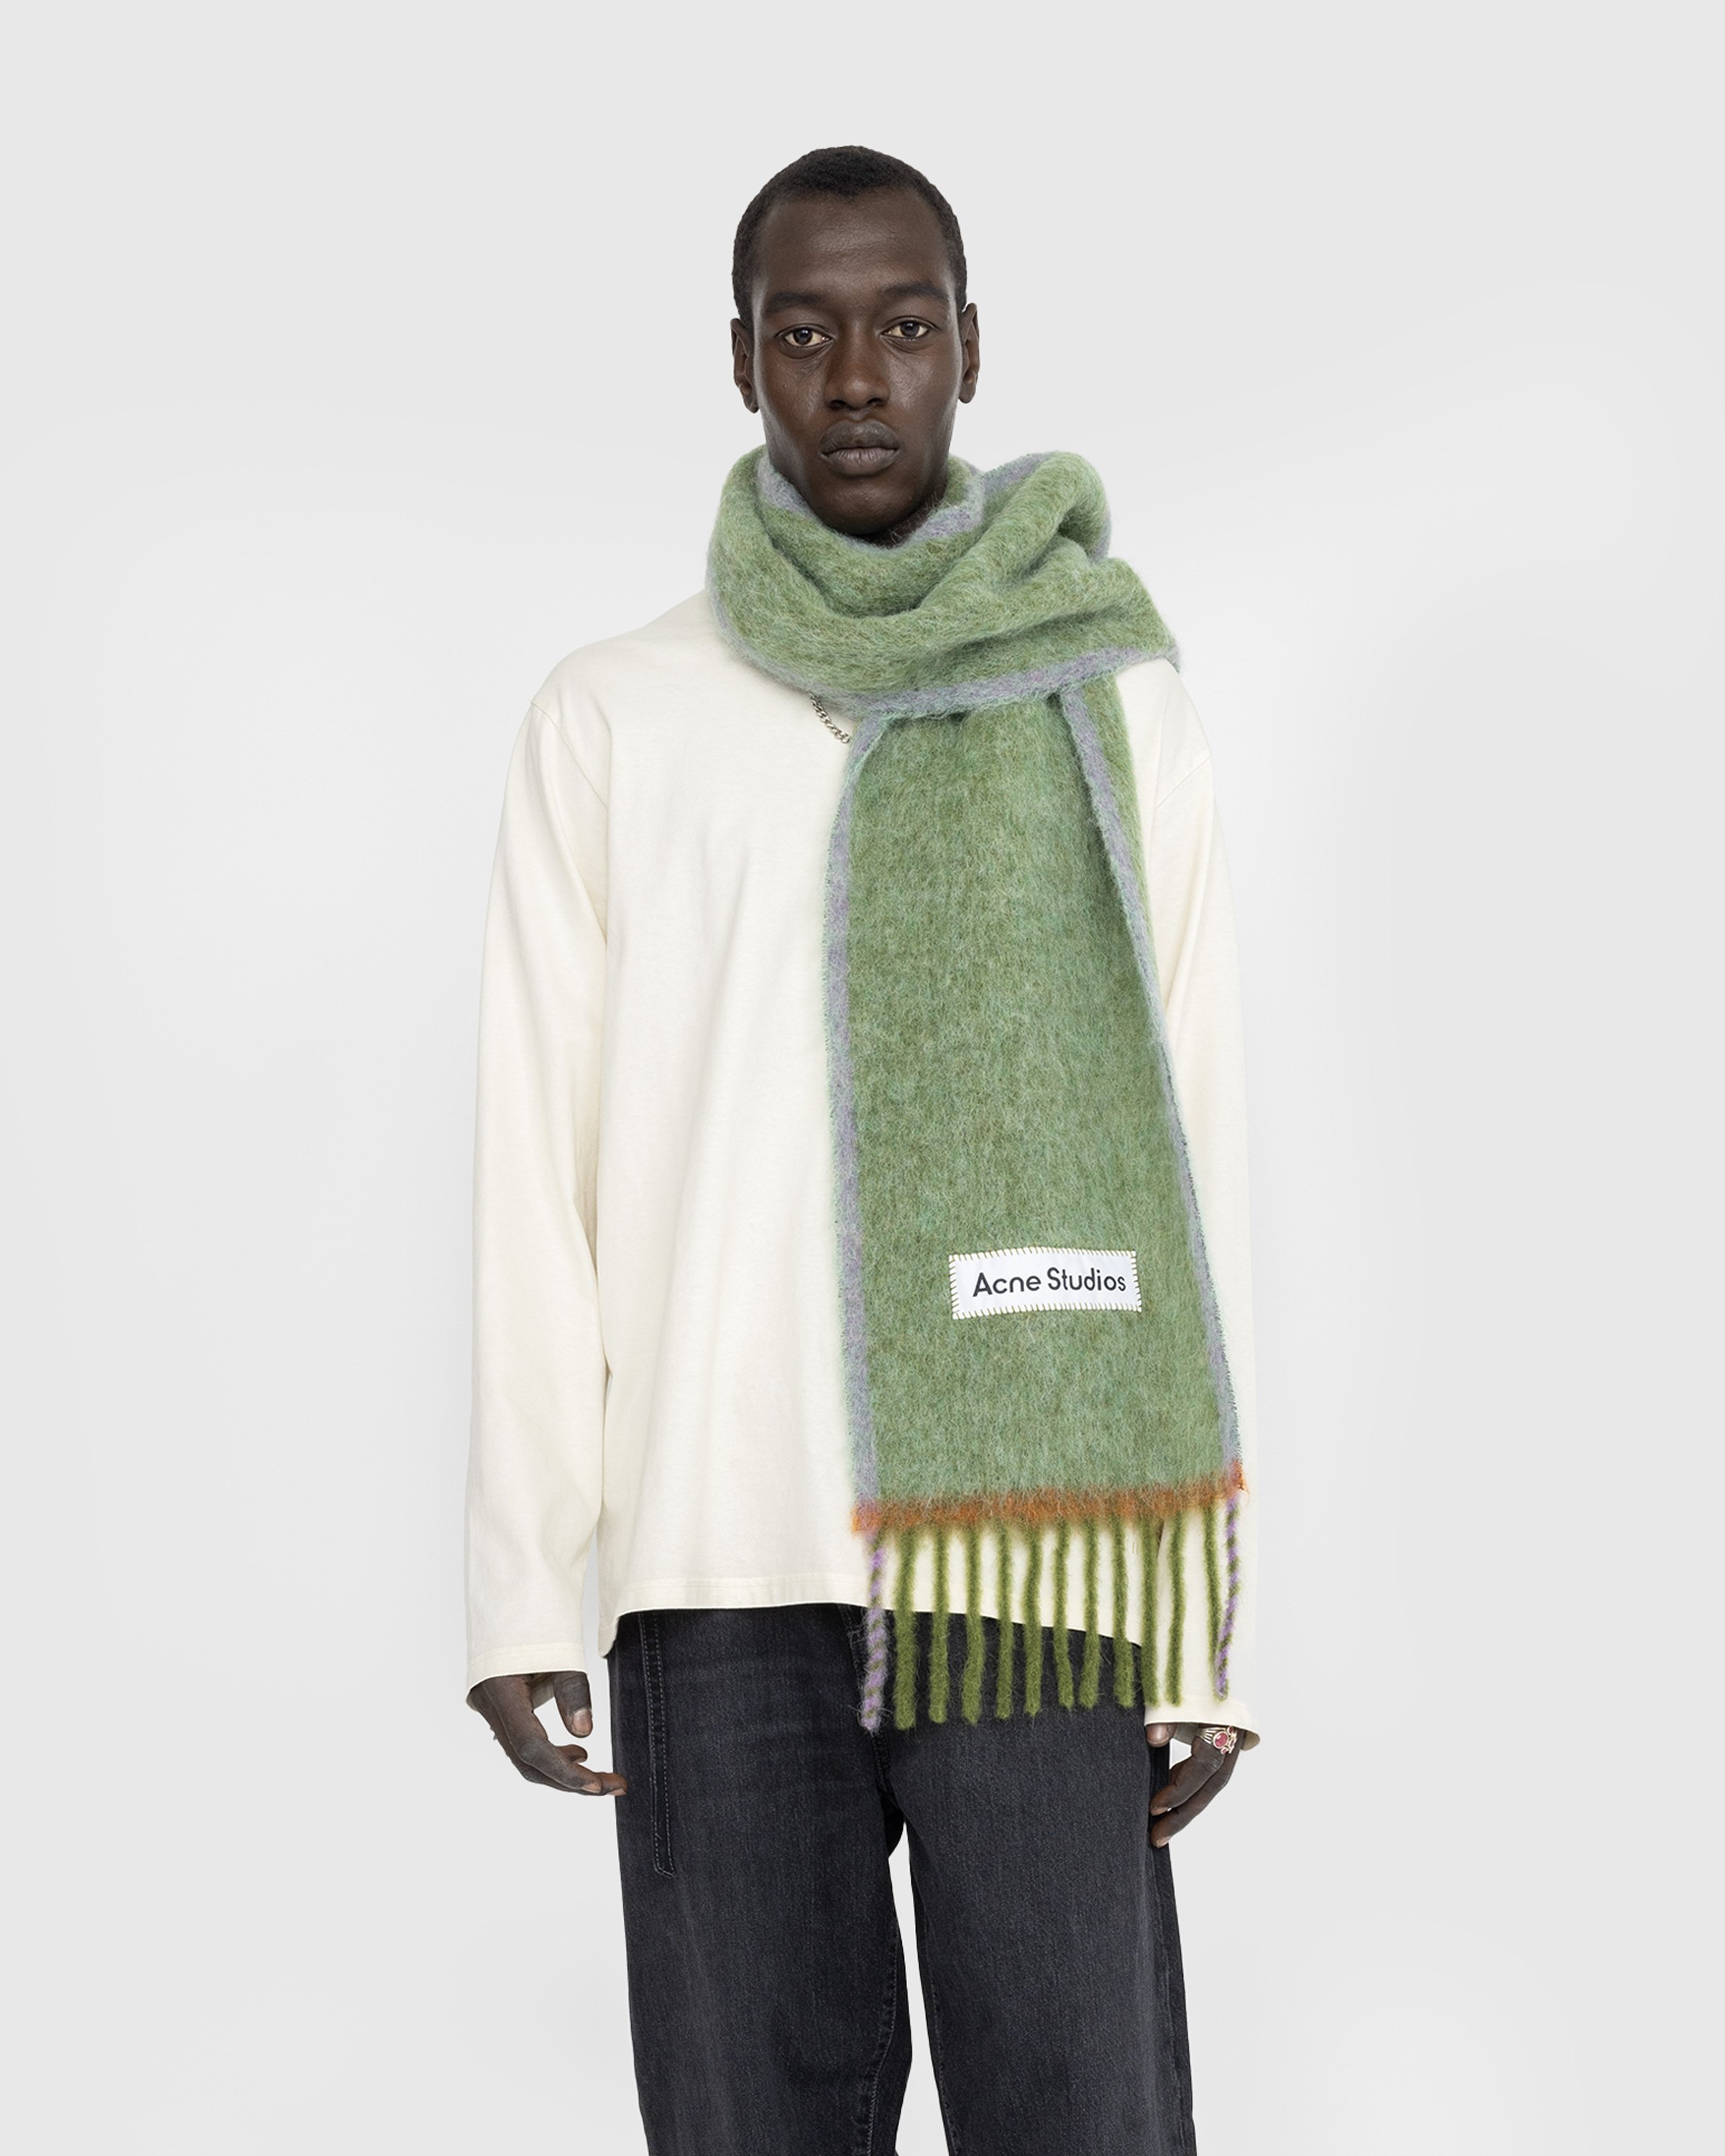 Acne Studios - Wool Mohair Scarf Grass Green - Accessories - Green - Image 3